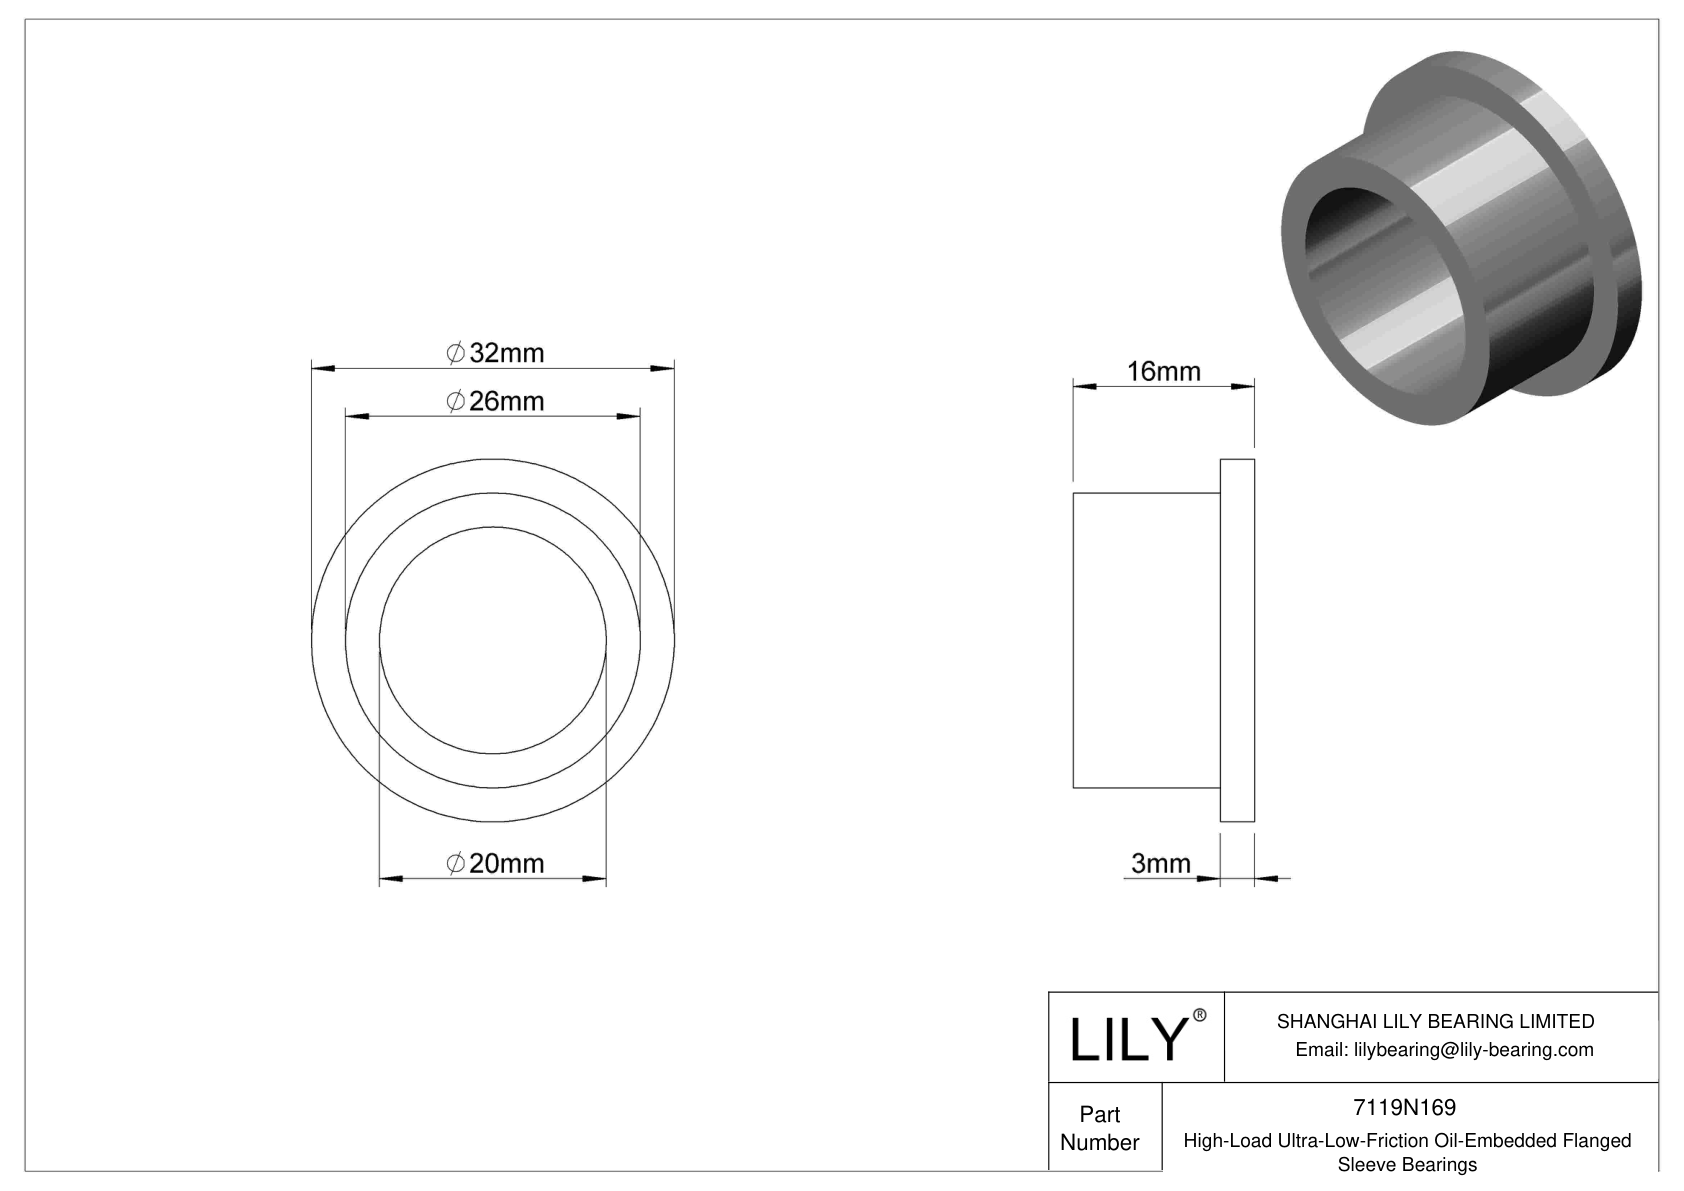 HBBJNBGJ High-Load Ultra-Low-Friction Oil-Embedded Flanged Sleeve Bearings cad drawing